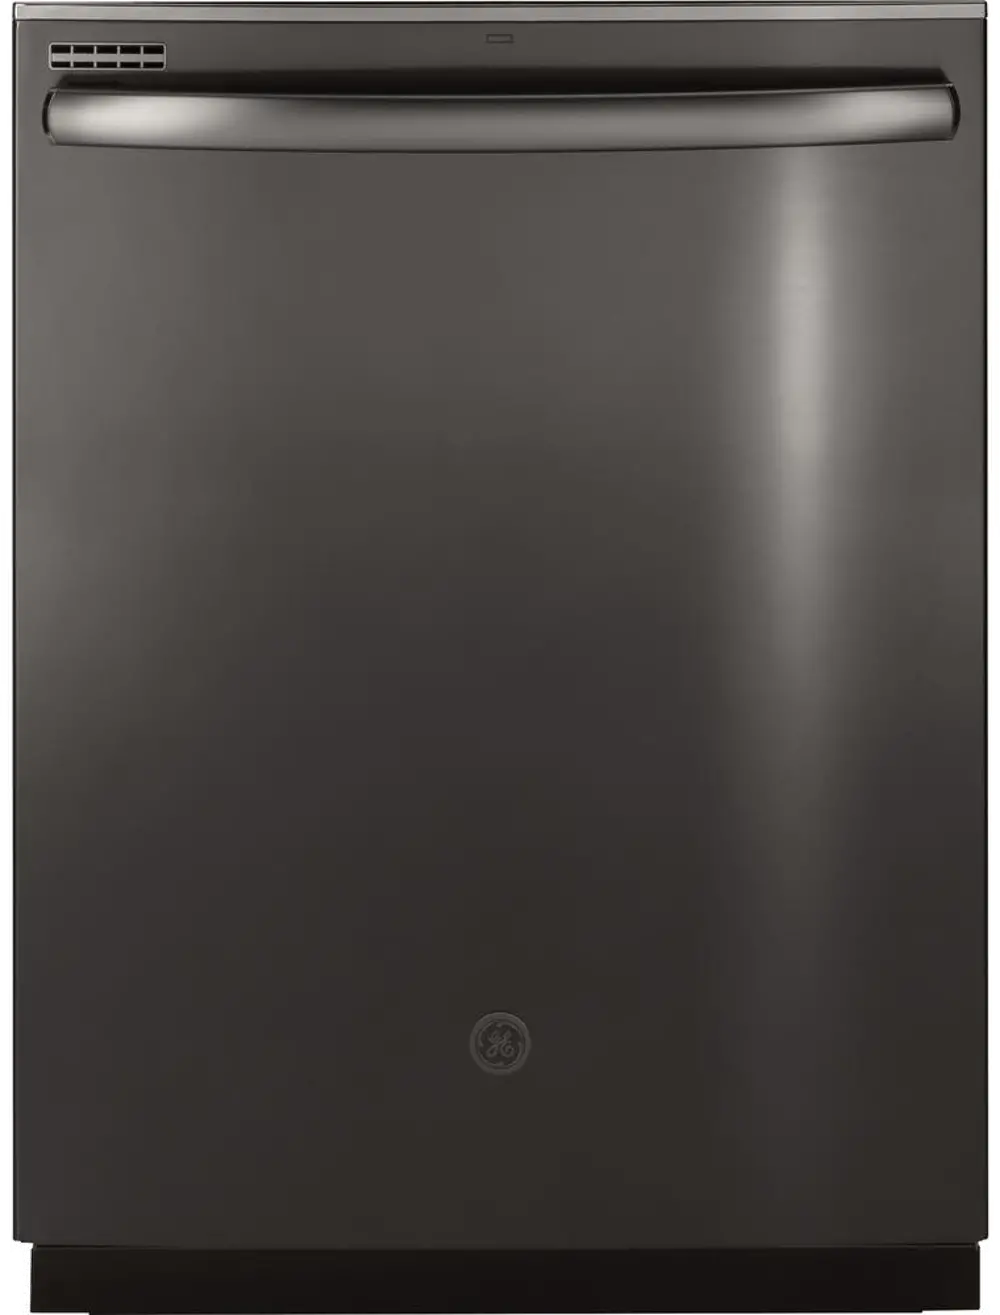 GDT605PBMTS GE Top Control Dishwasher - Black Stainless Steel-1